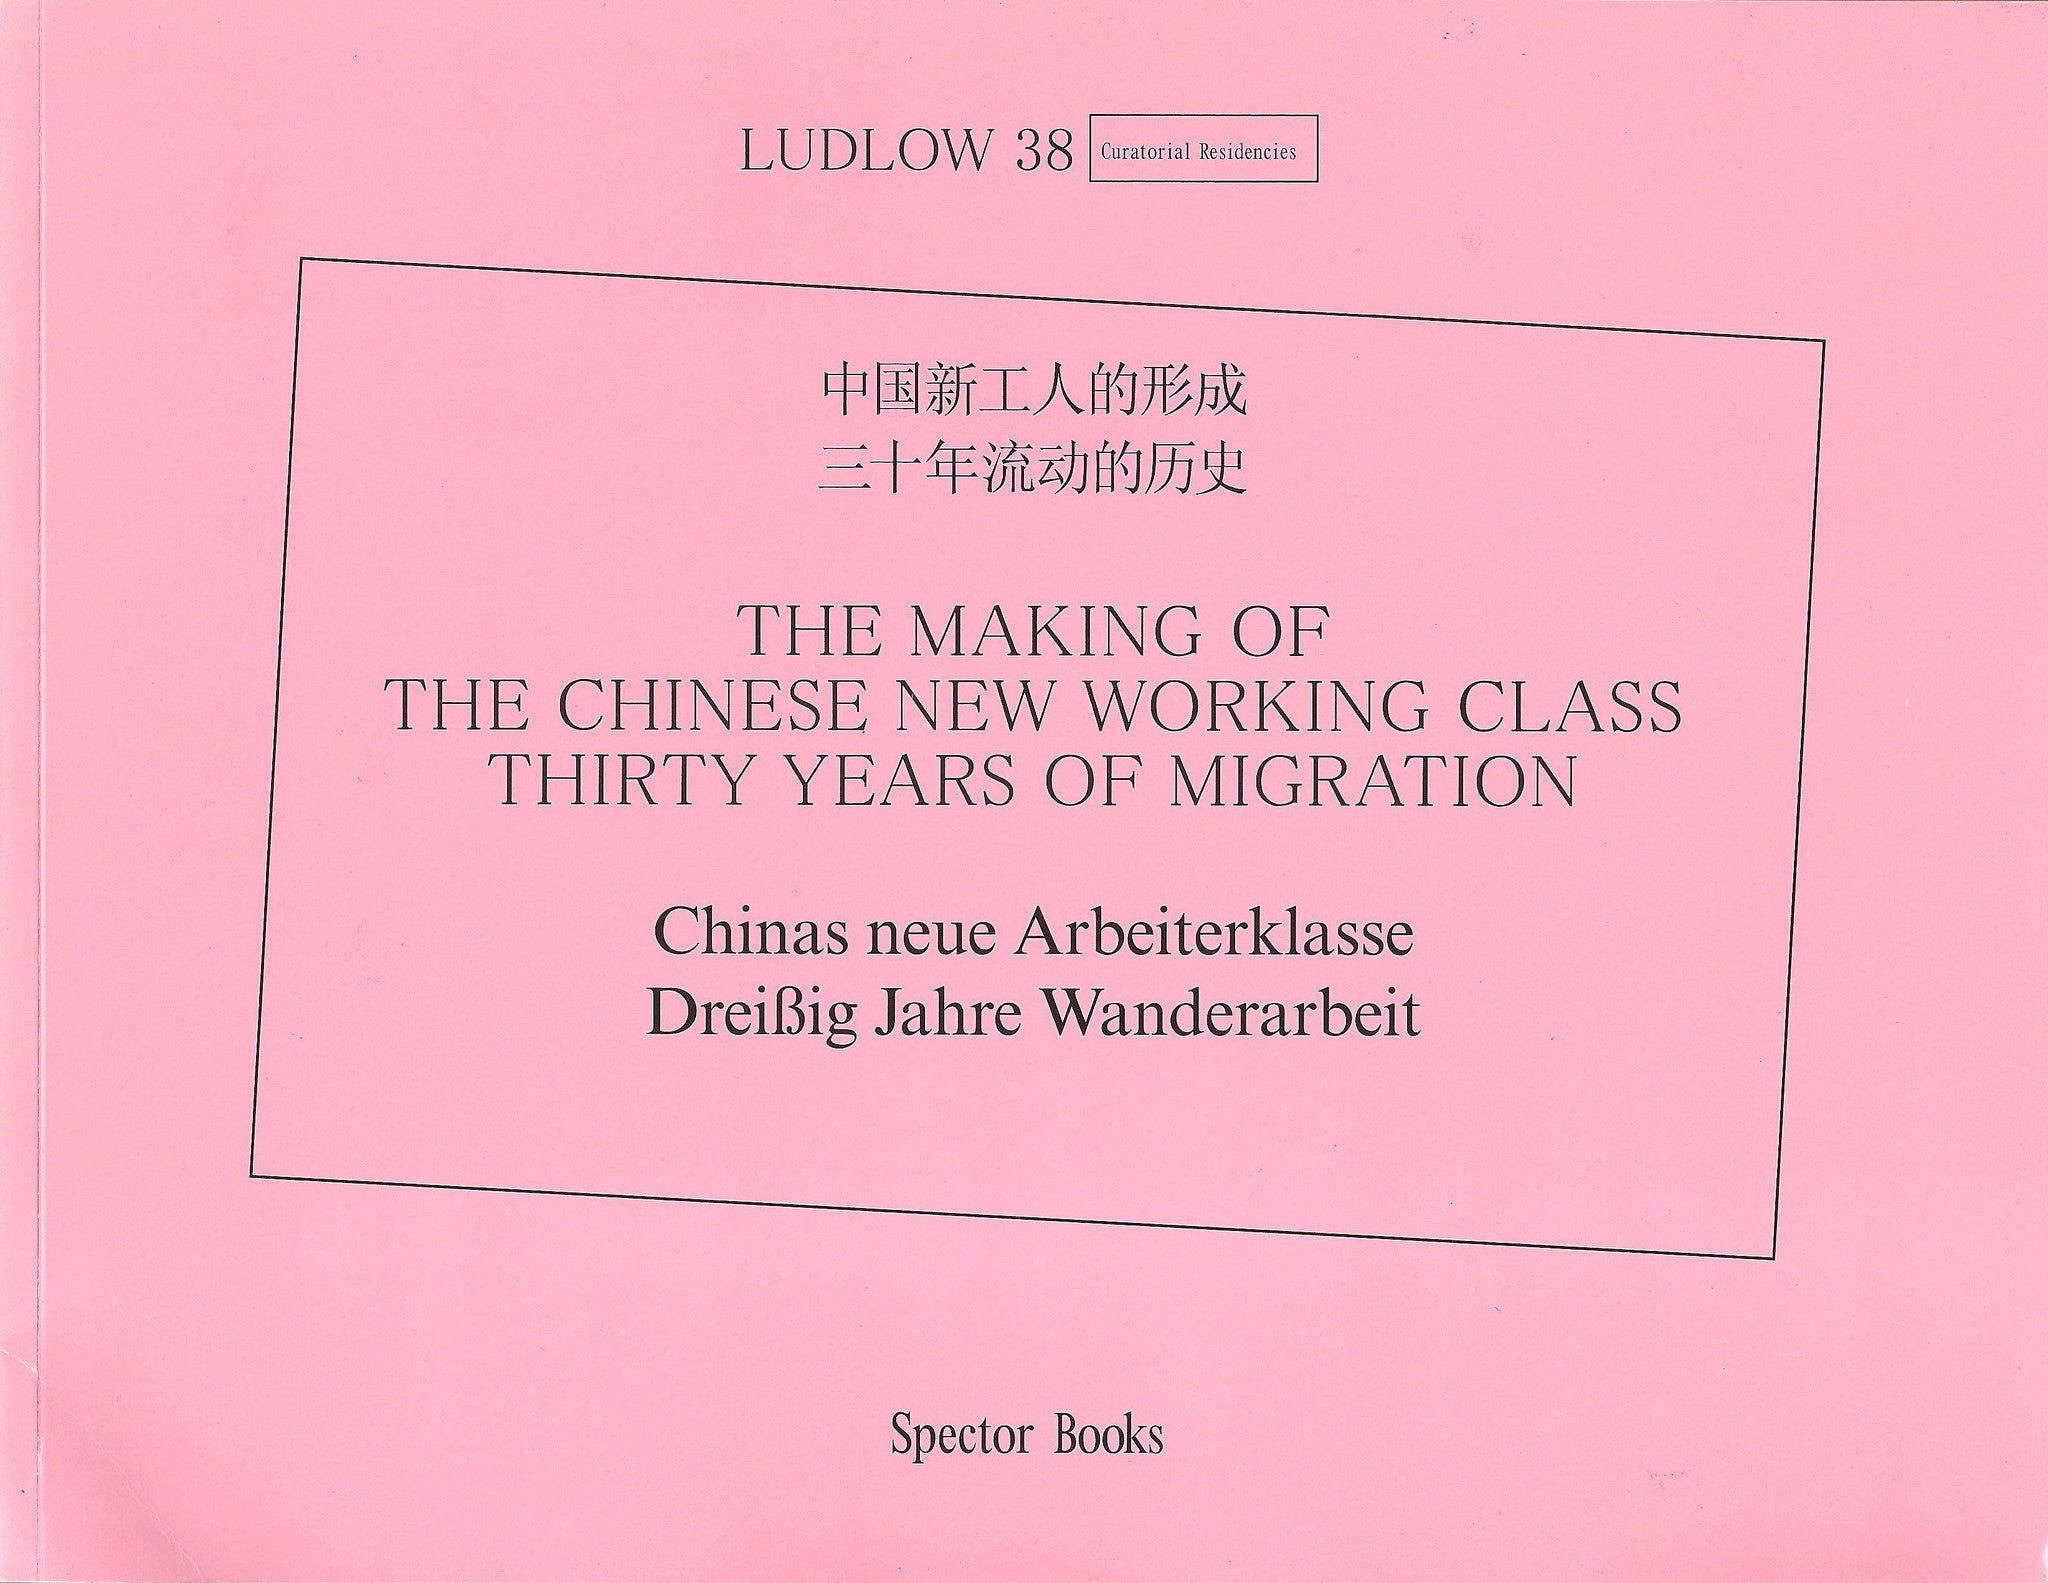 Ludlow 38 Curatorial Residencies: The Making of the New Chinese Working Class Thirty Years Of Migration